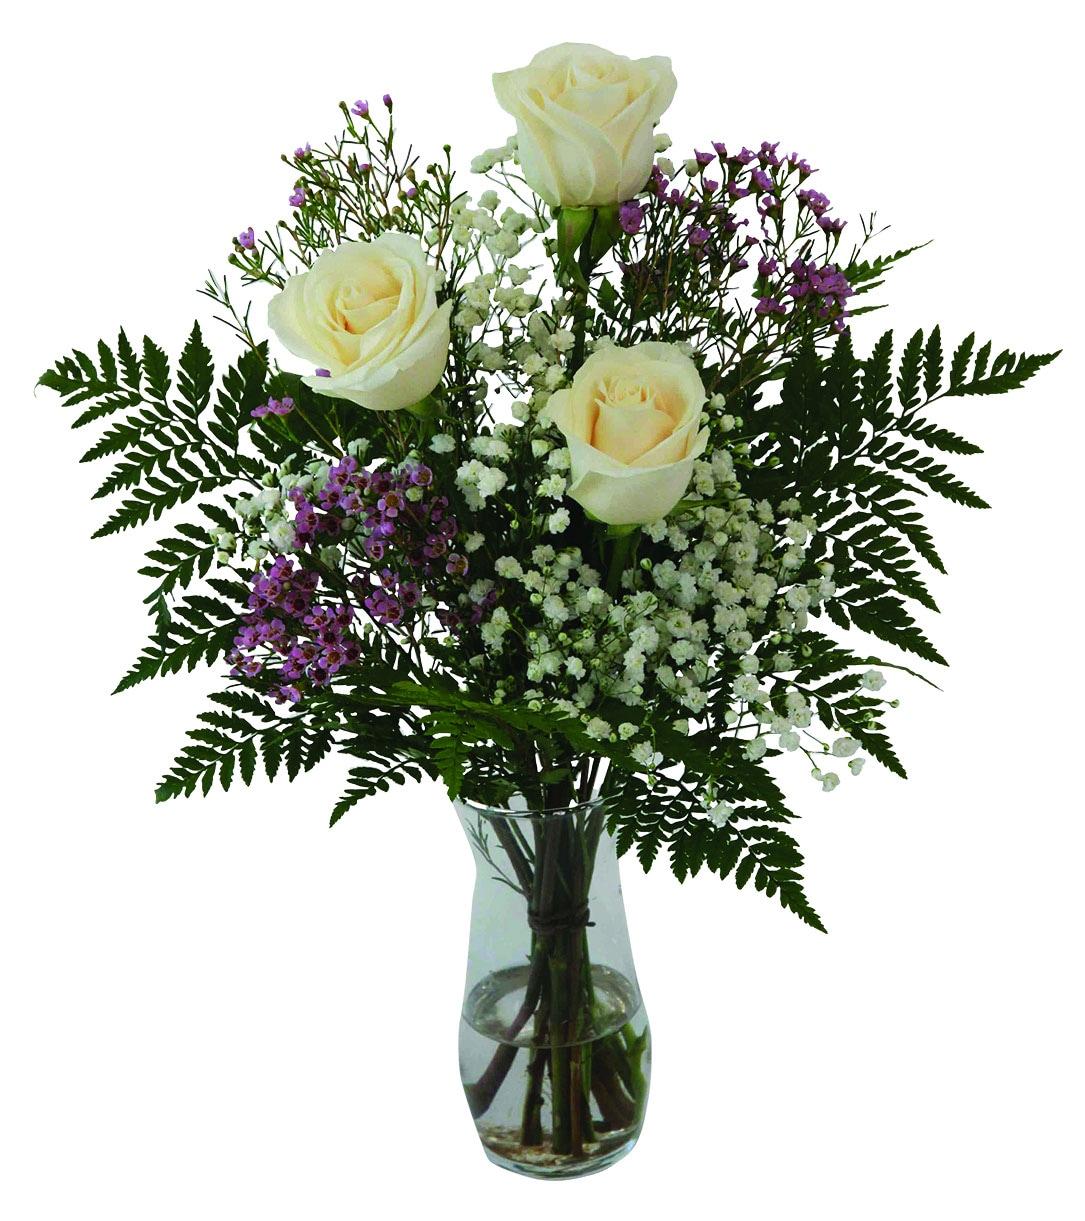 A vase arrangement with 3 white roses, greens and fillers.